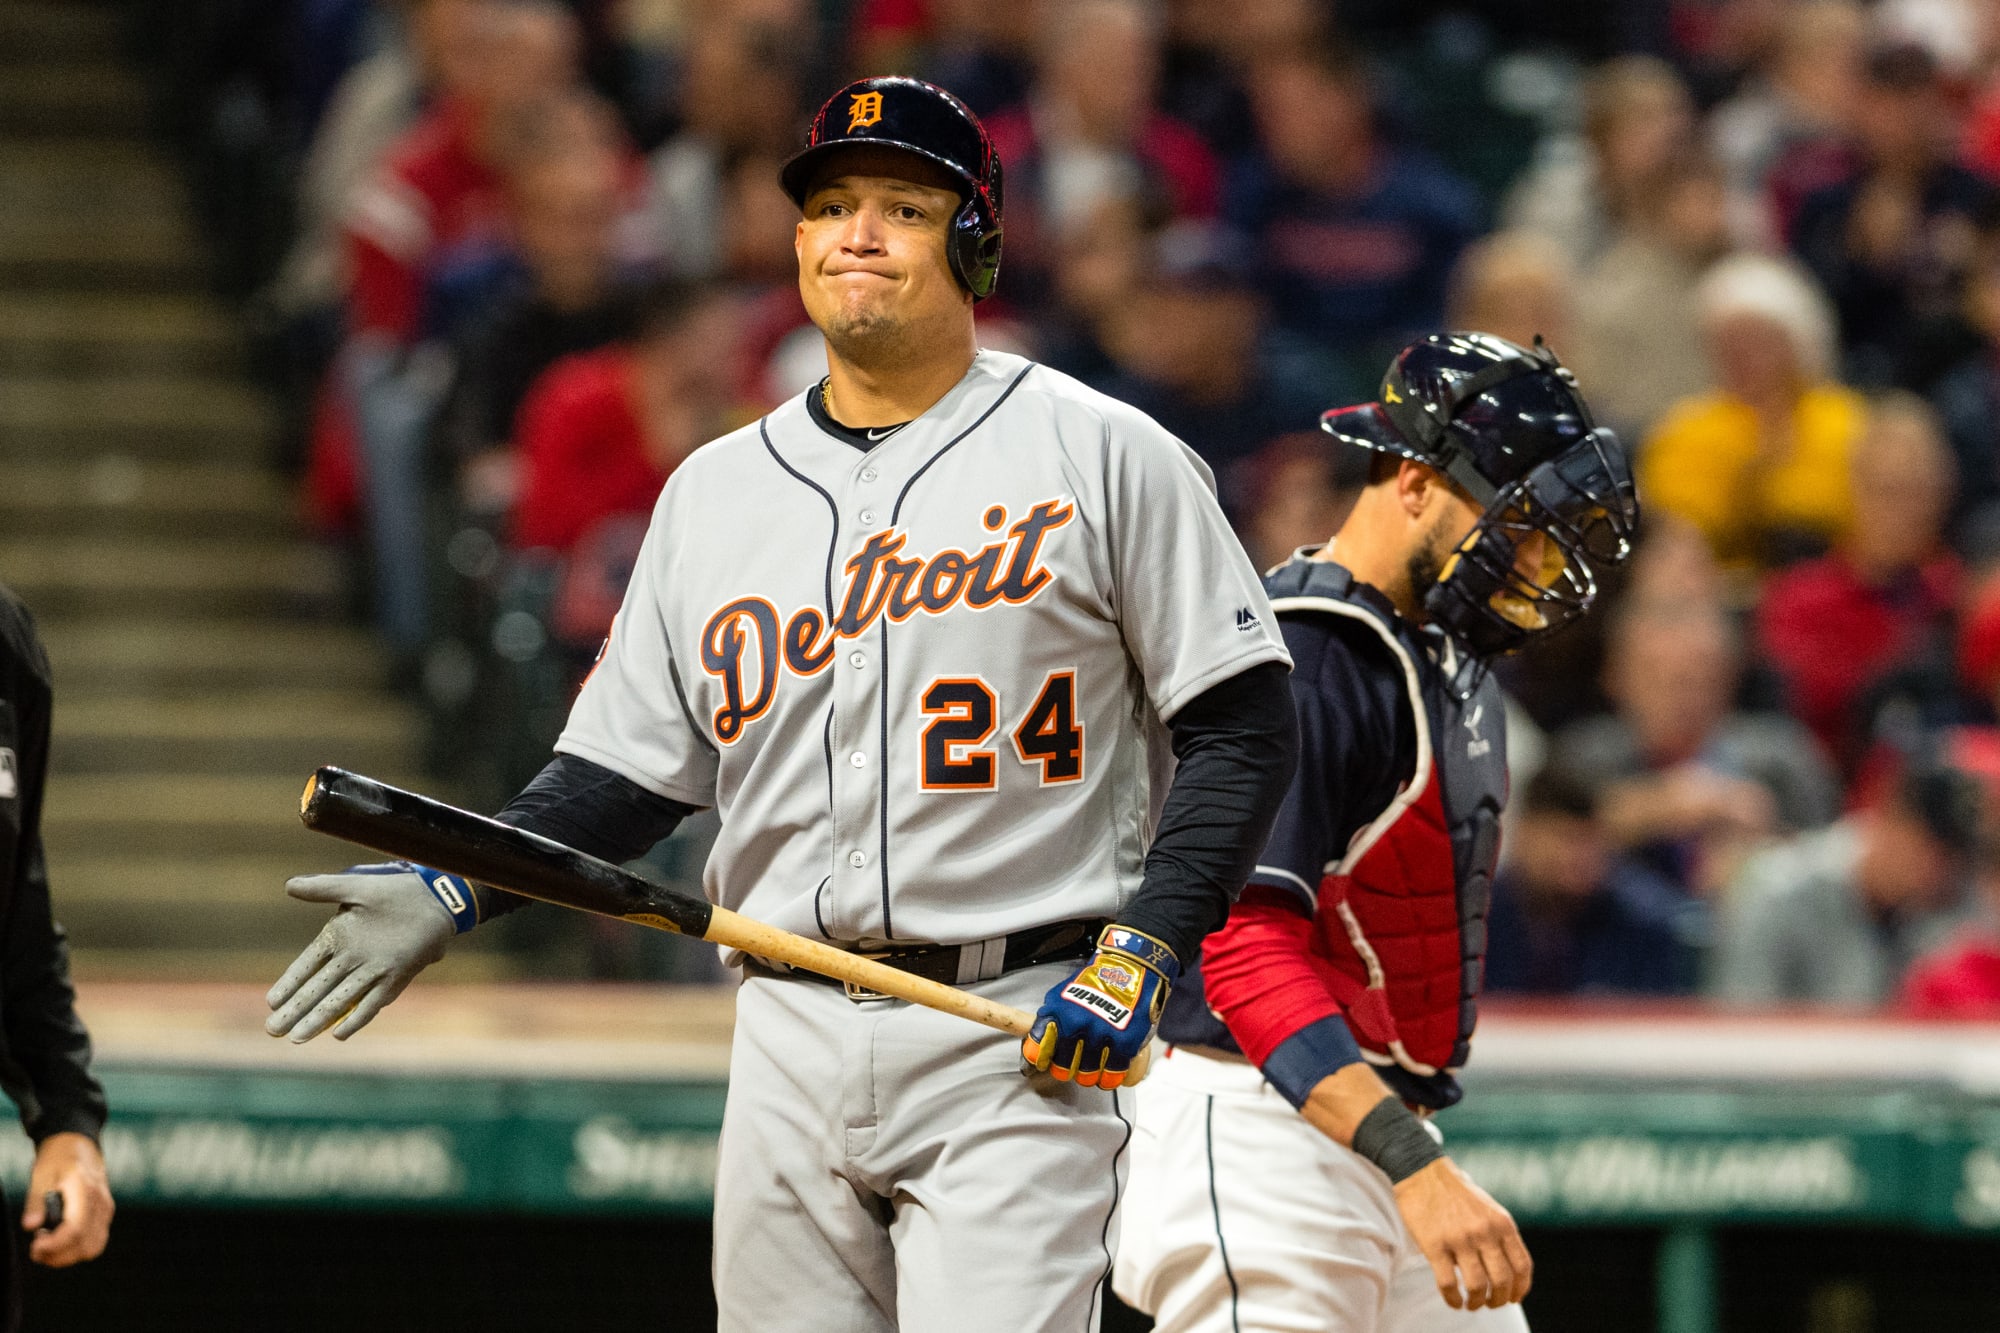 Tigers' Cabrera worth his weight in millions